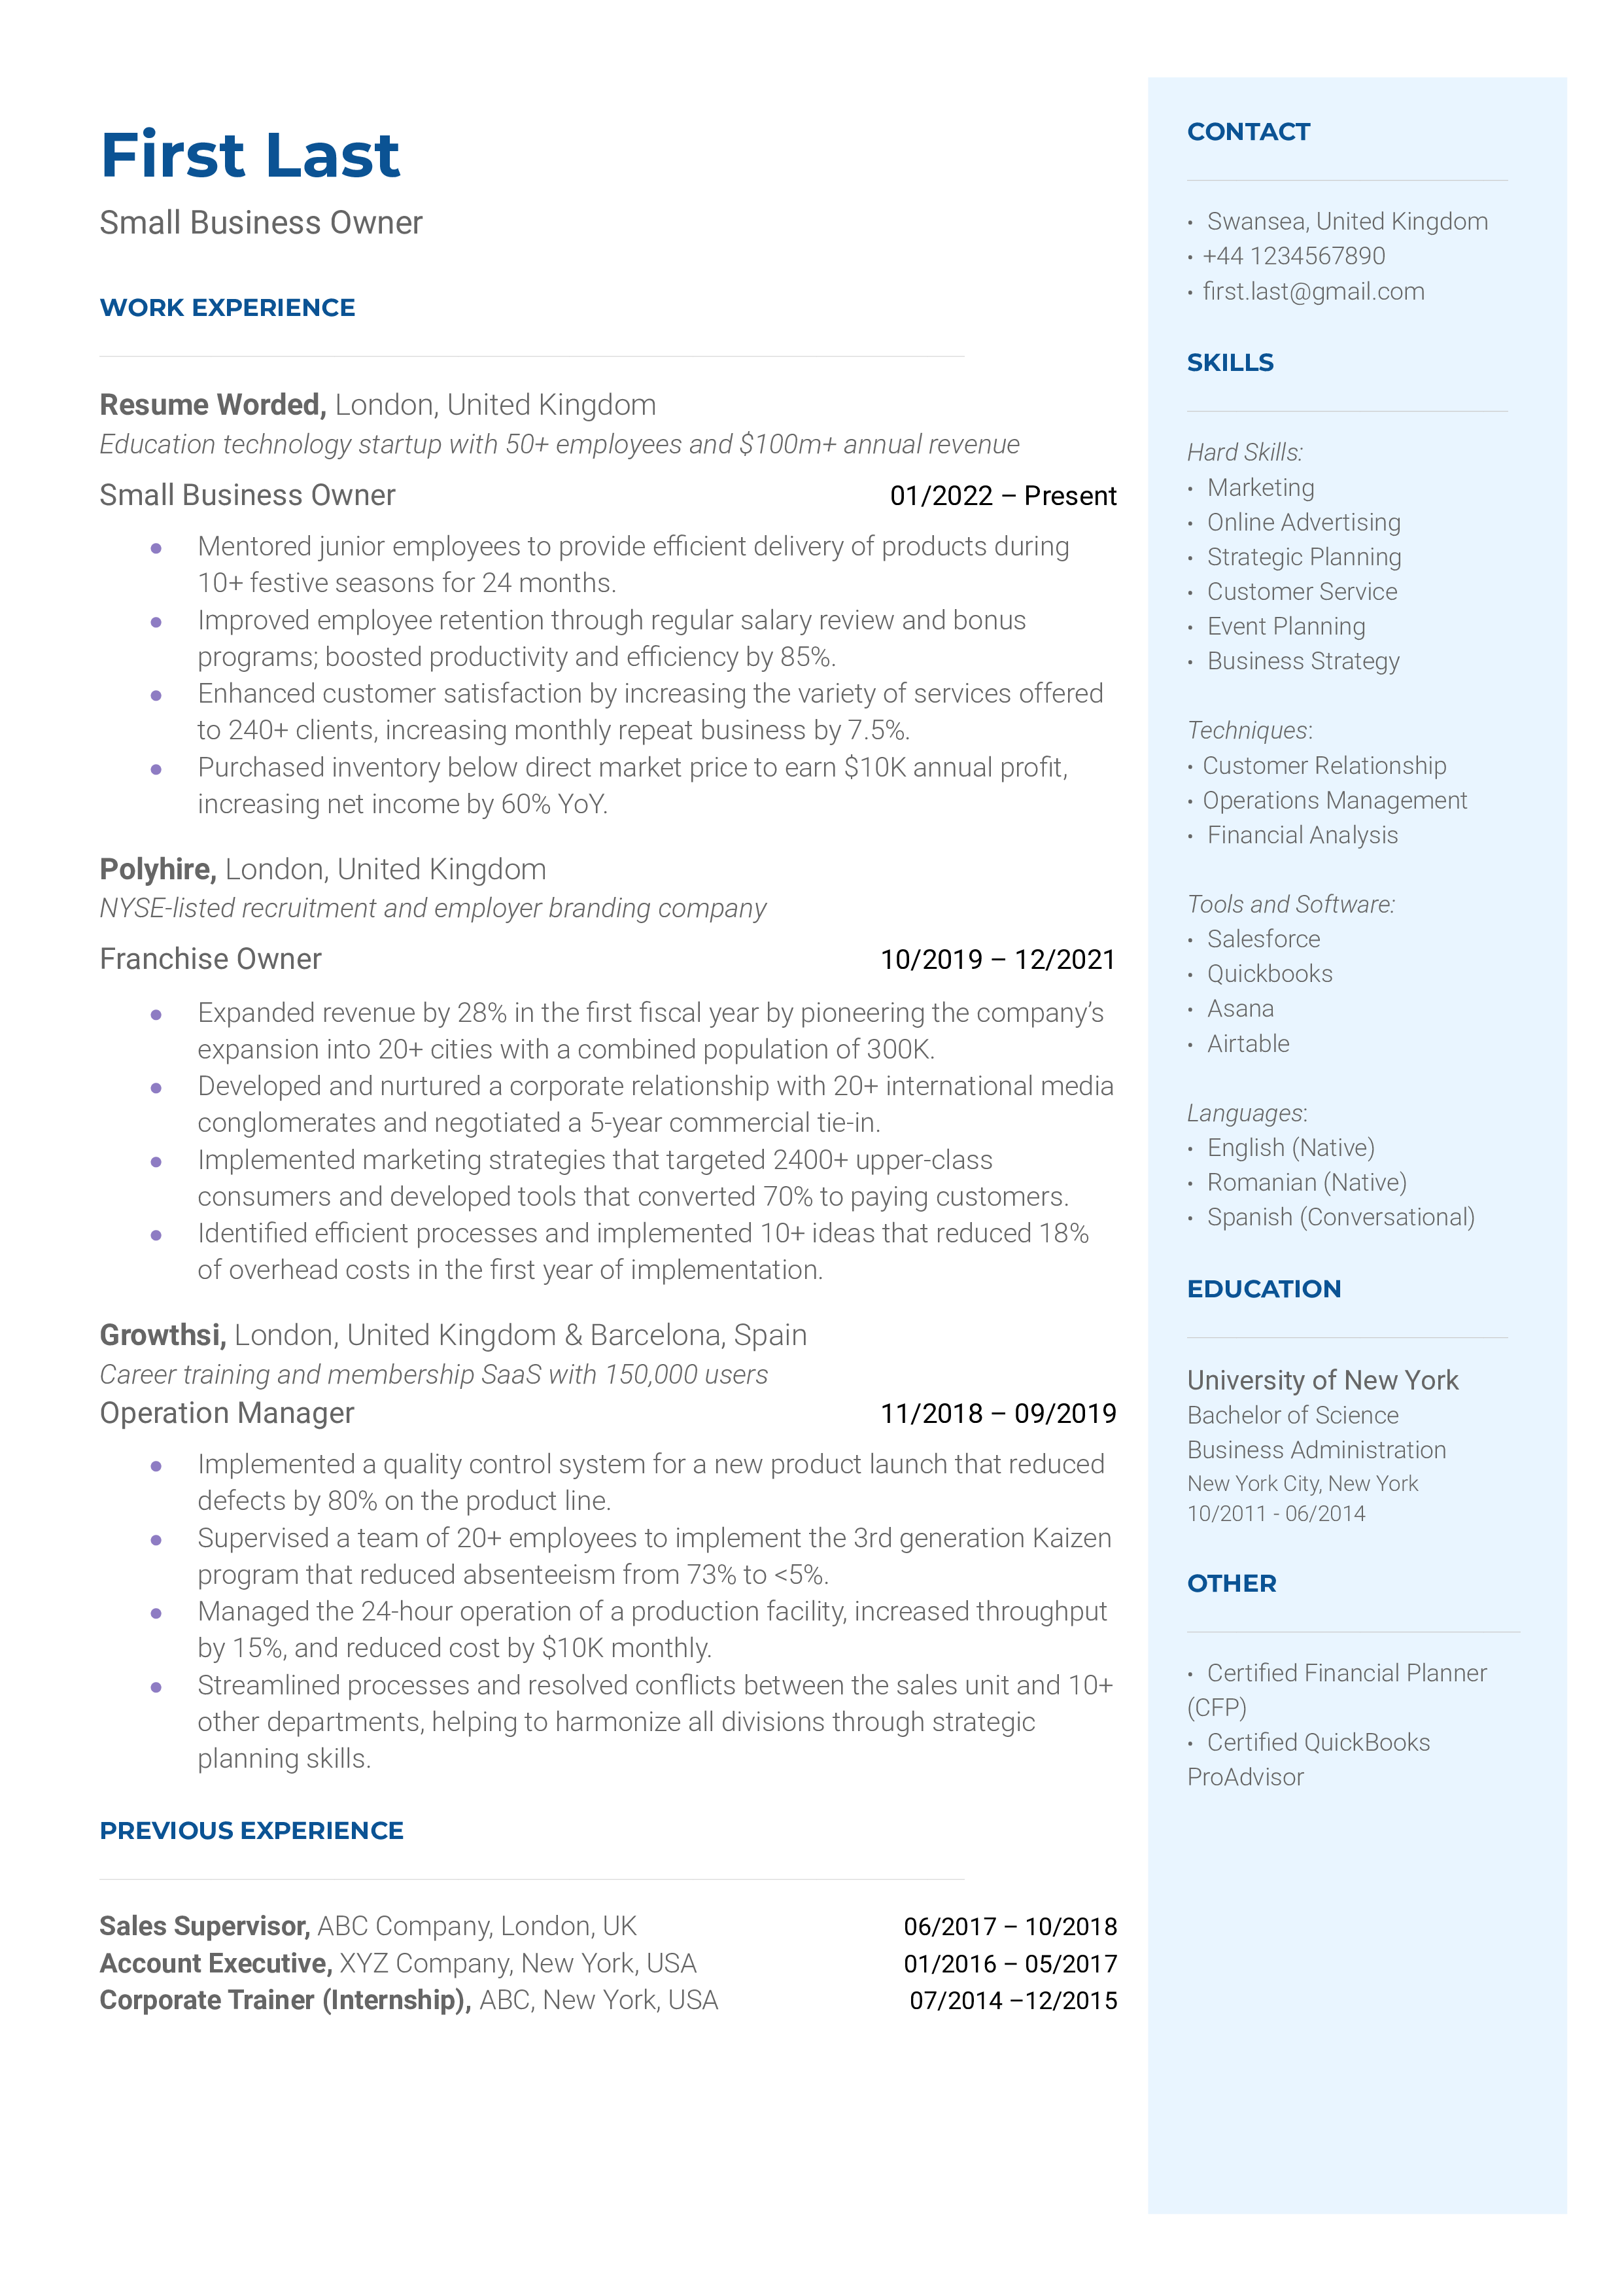 A small business owner resume template including additional work experience.